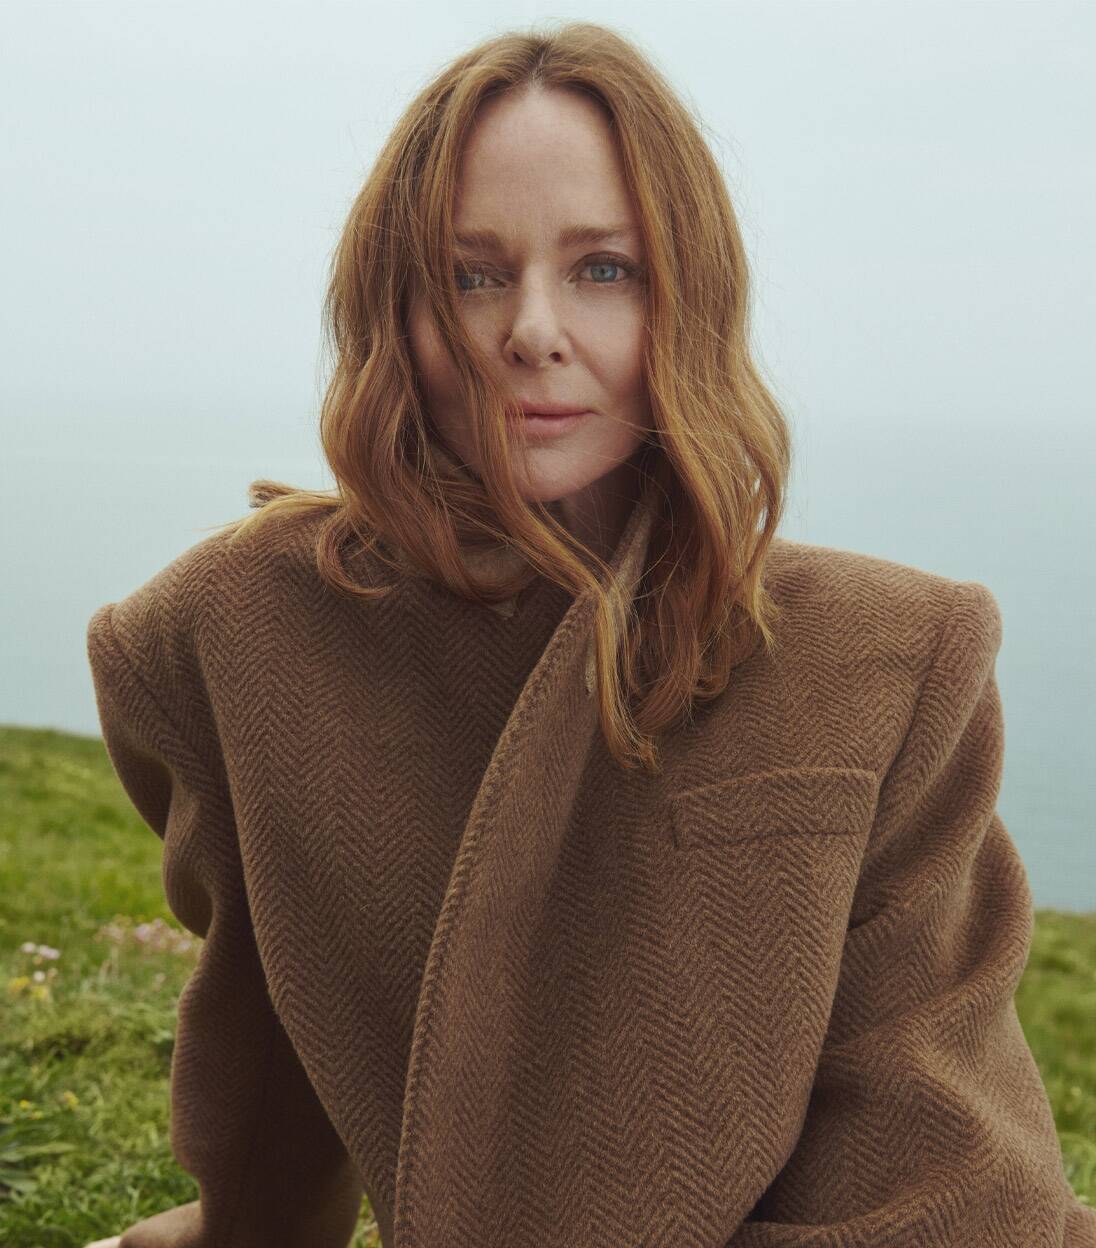 About LVMH and Stella McCartney's New 3-Piece Skincare Line